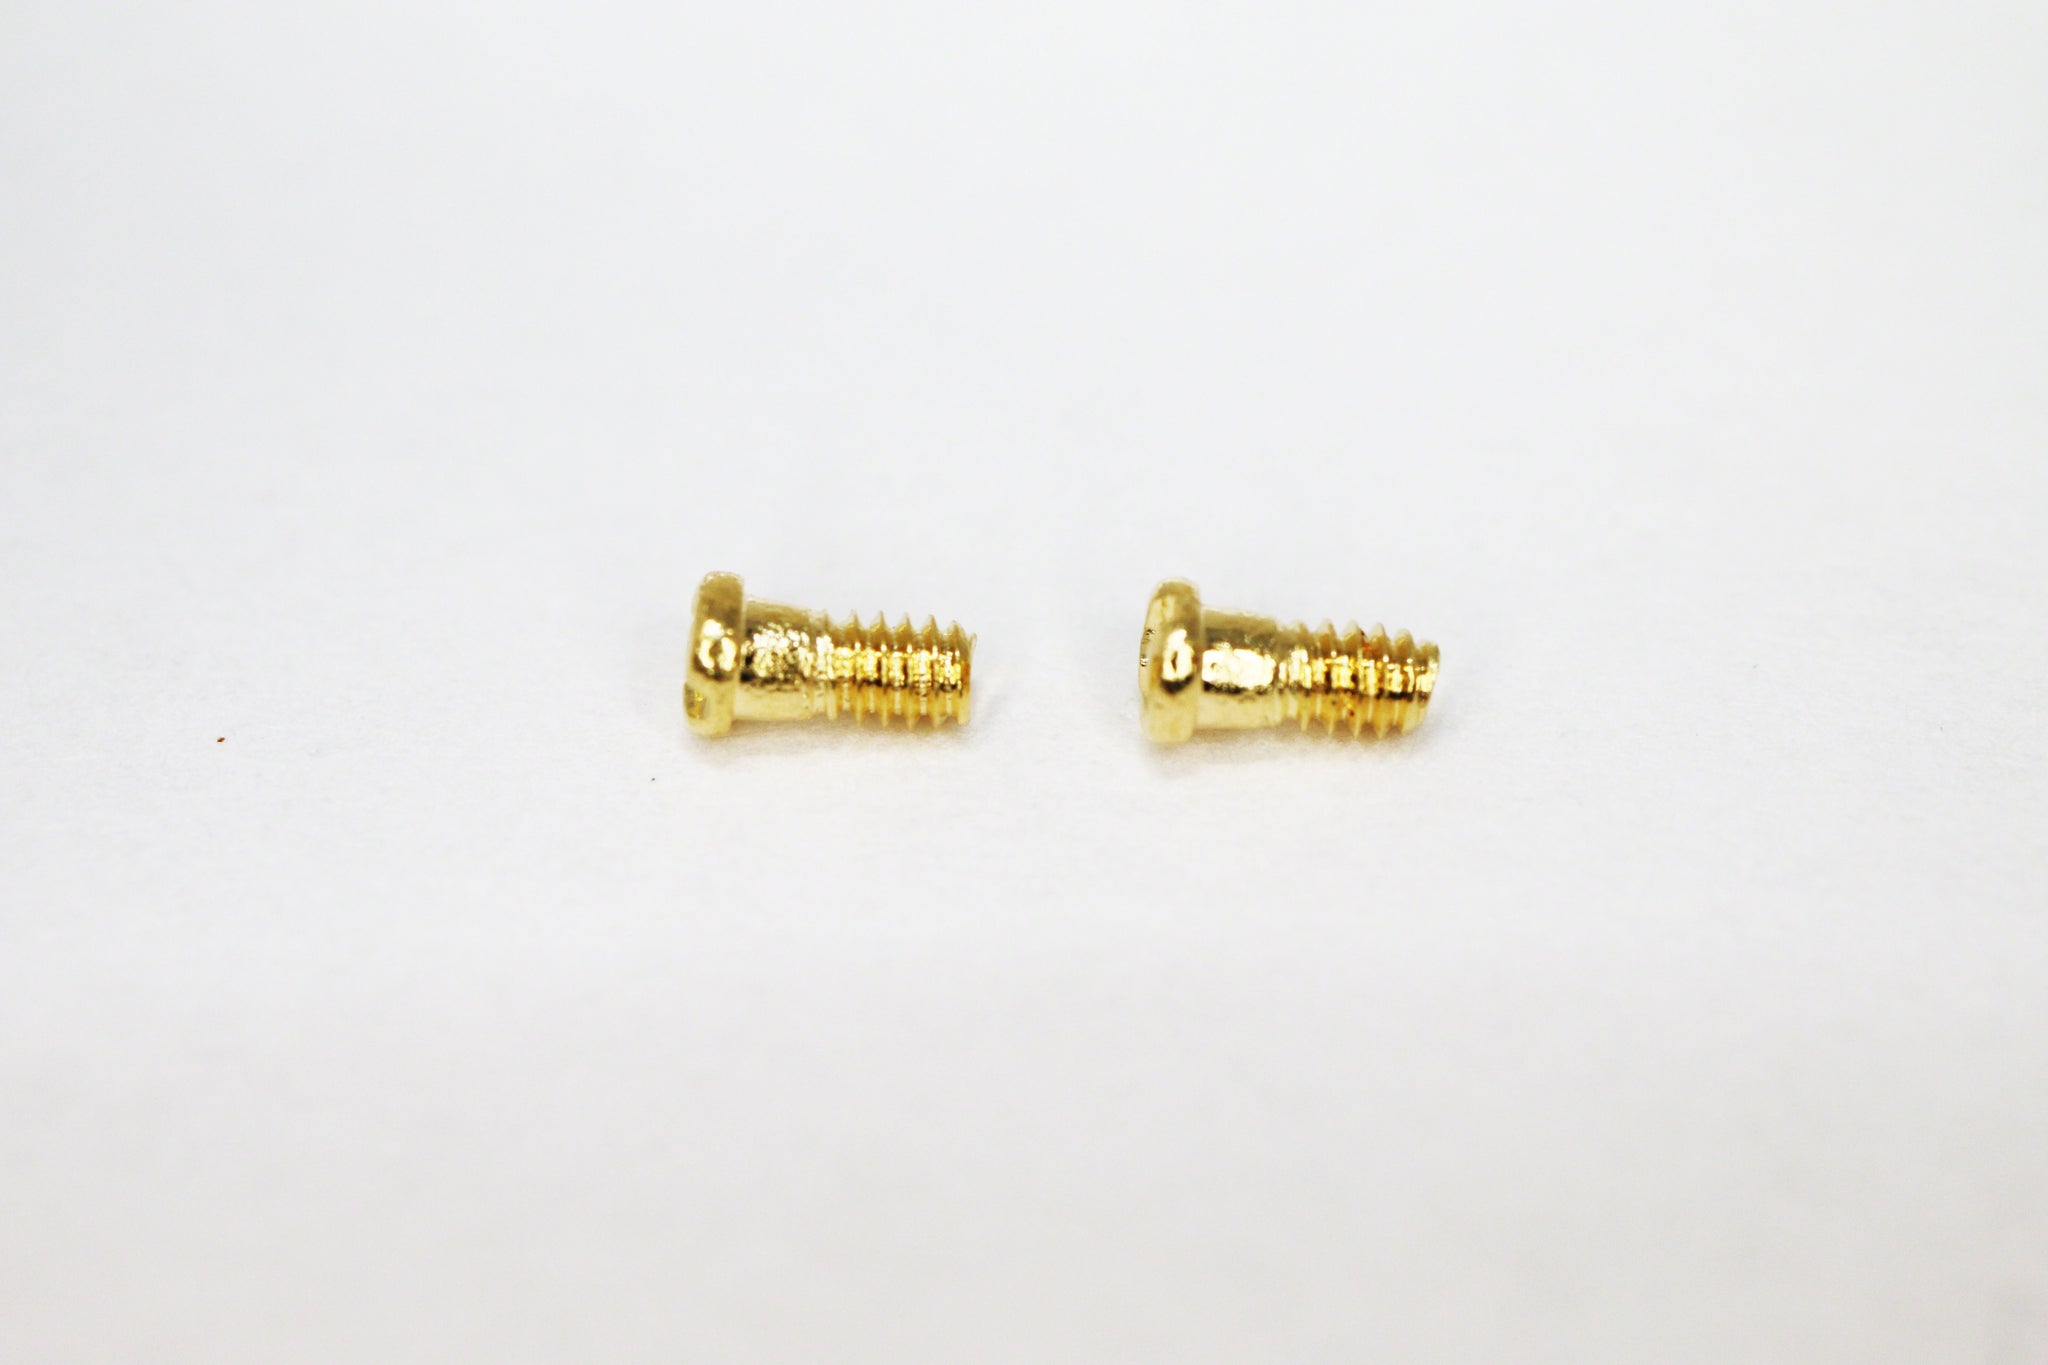 replacement screws for ray ban sunglasses